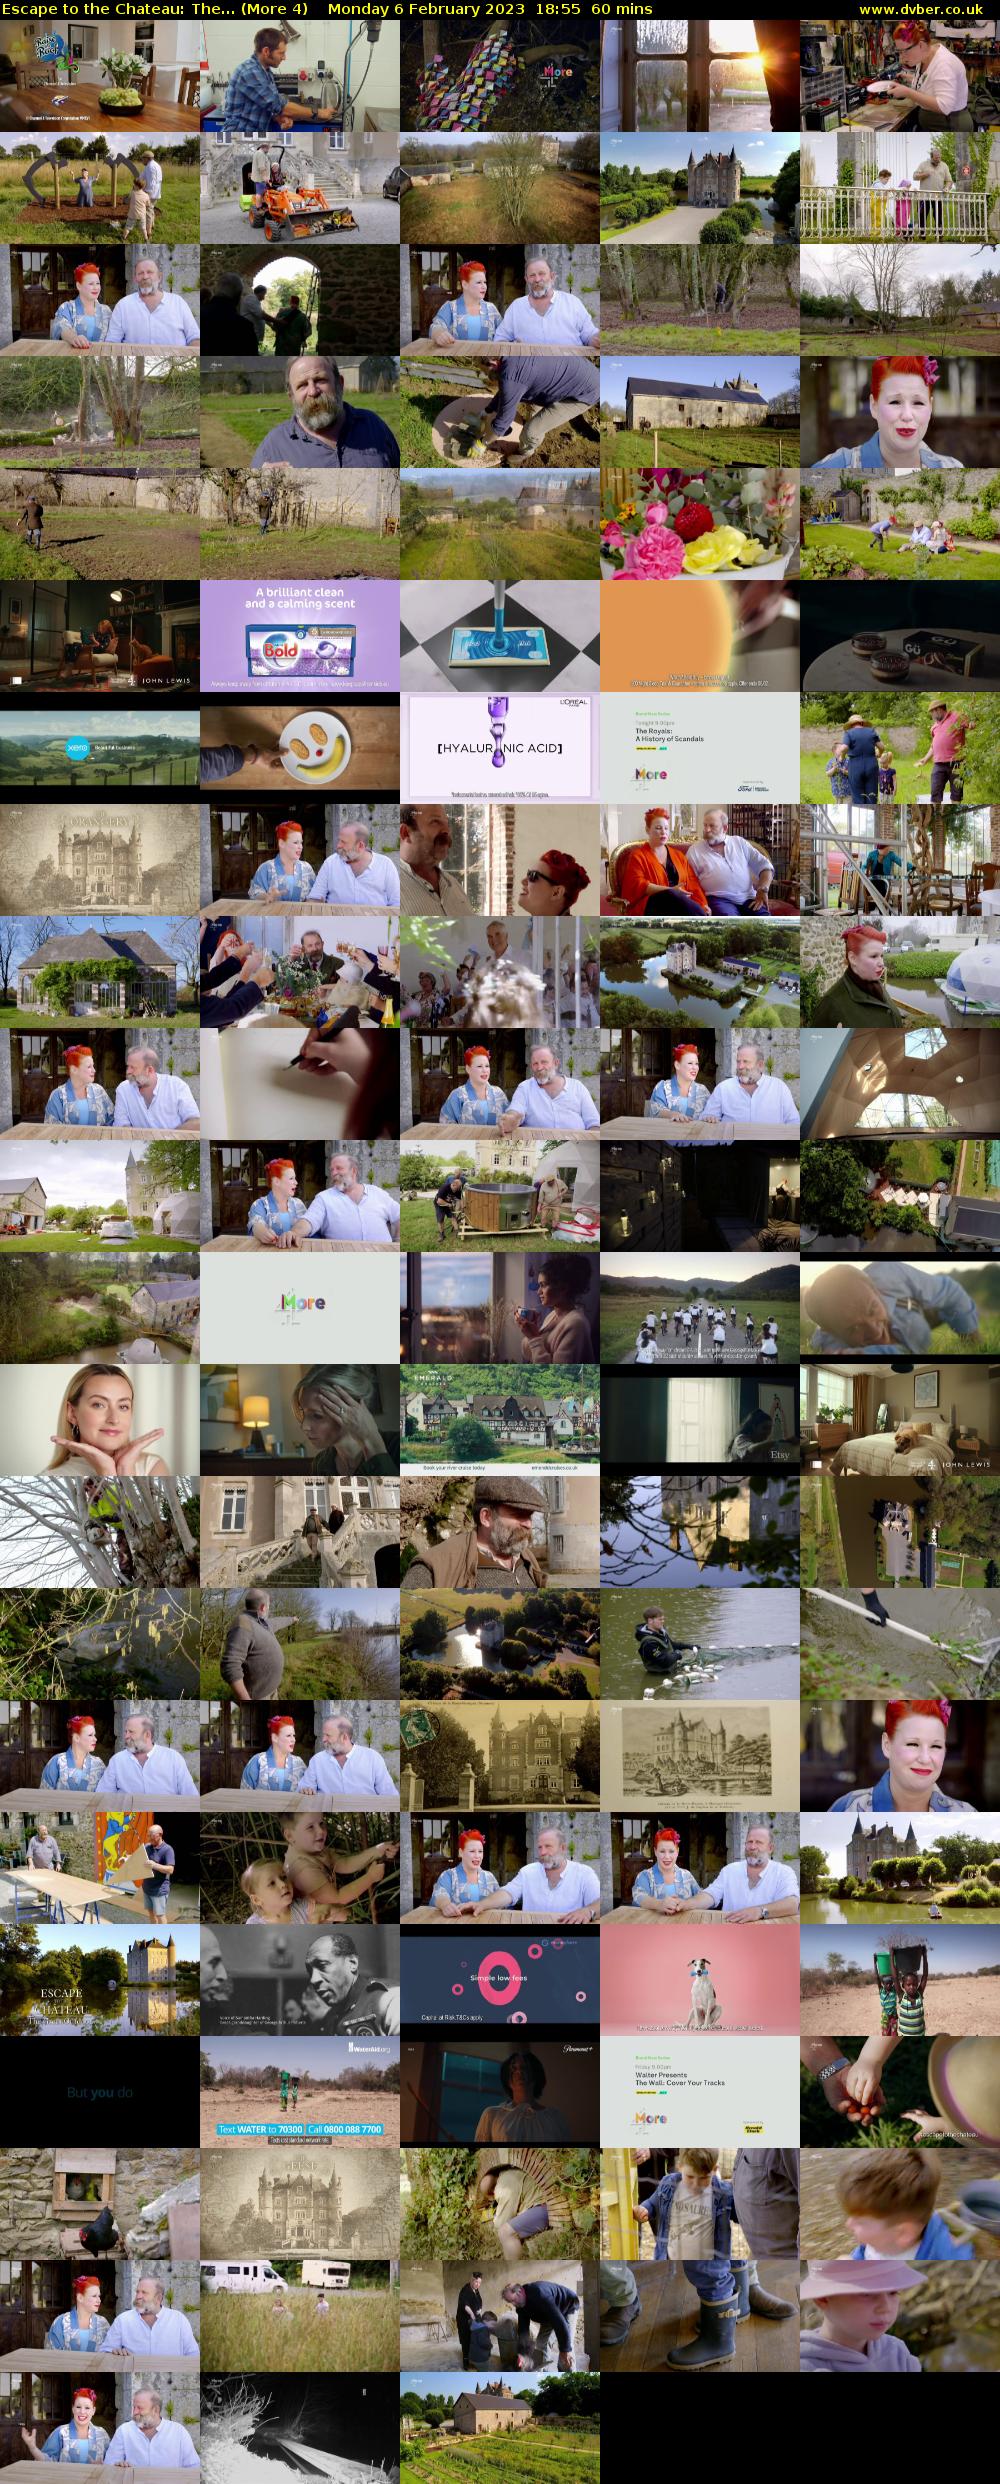 Escape to the Chateau: The... (More 4) Monday 6 February 2023 18:55 - 19:55